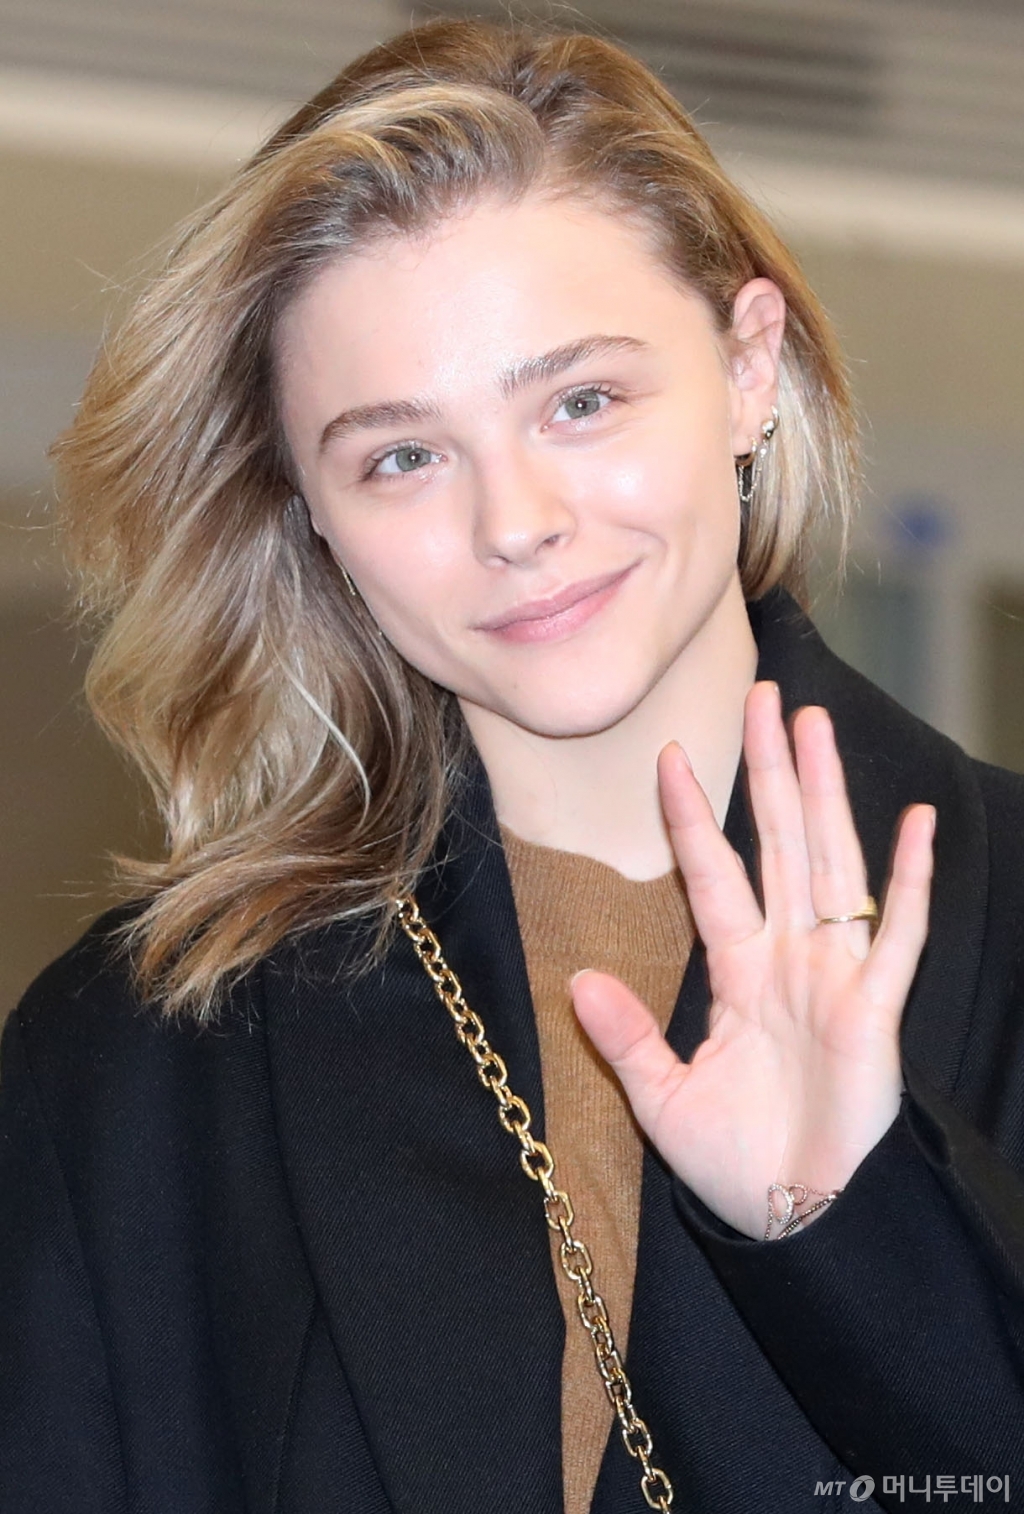 Hollywood Actor Chloe Moretz attended a fashion brand event and visited Incheon International Airport on the afternoon of the 28th.